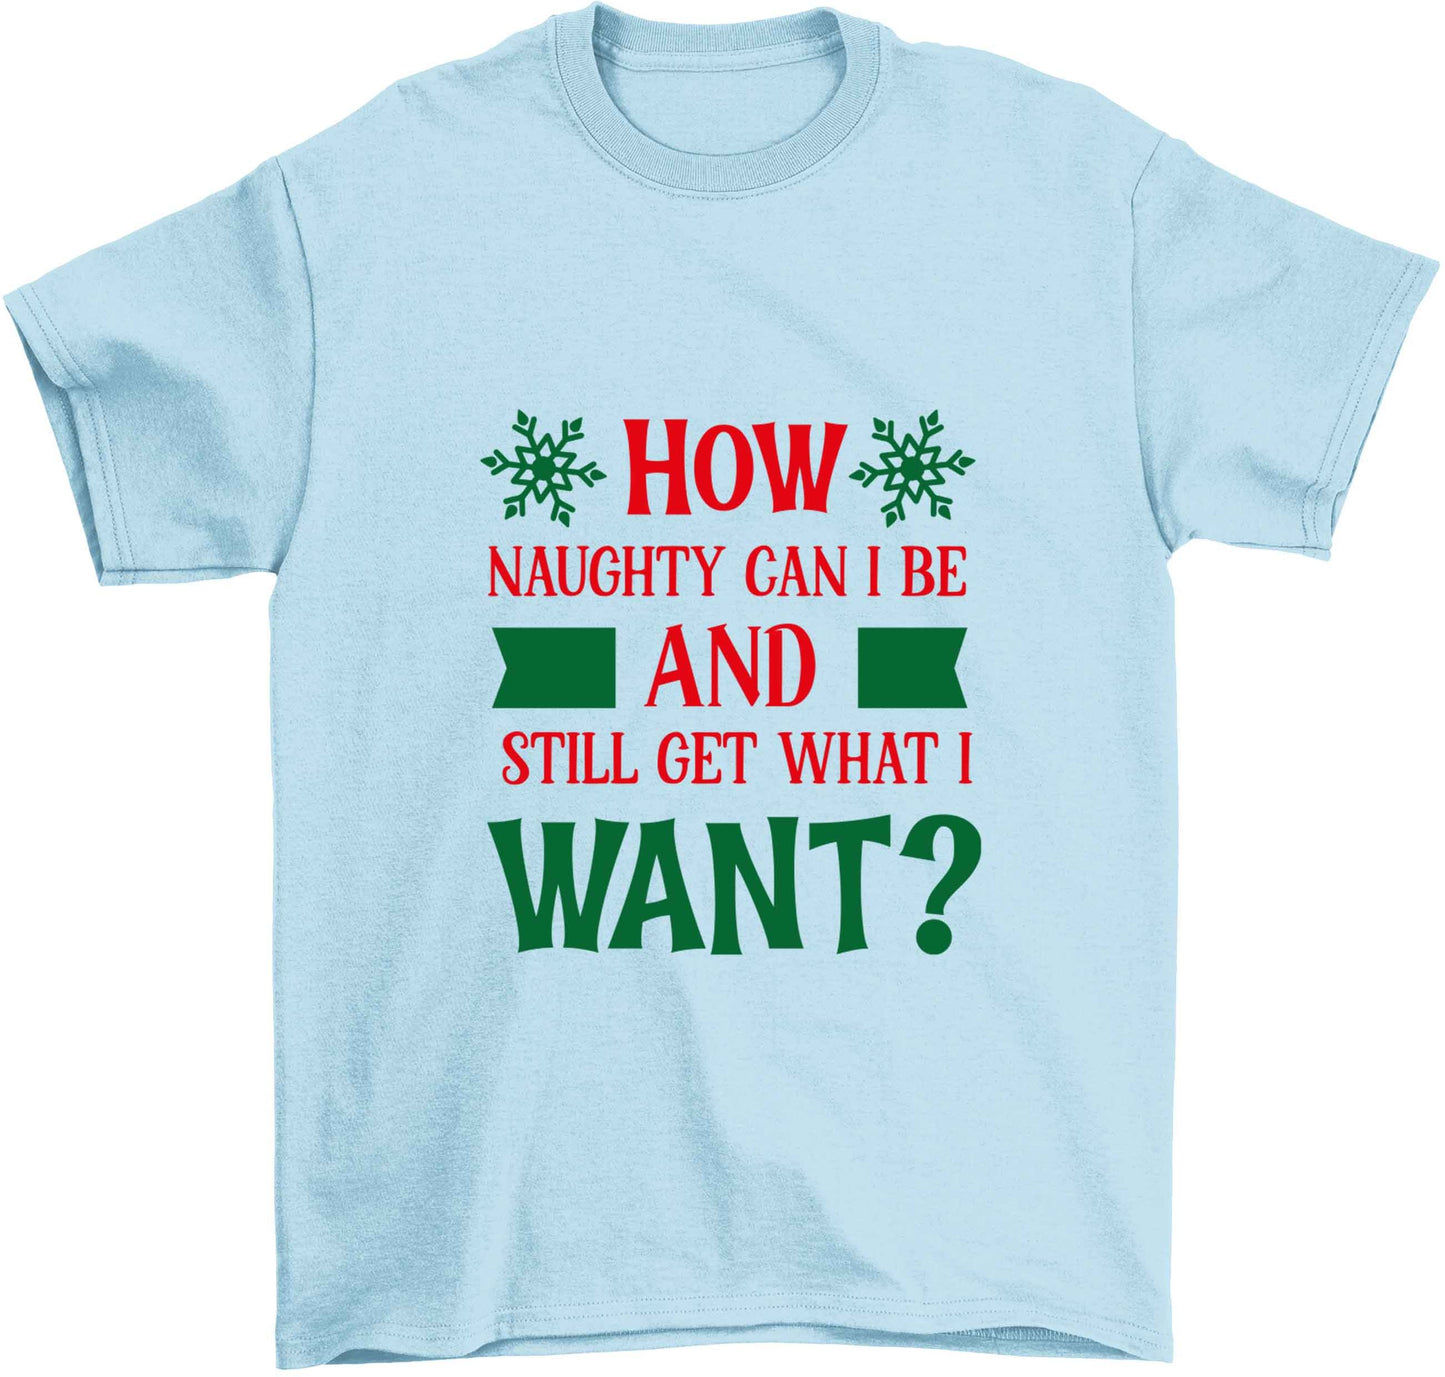 How naughty can I be and still get what I want? Children's light blue Tshirt 12-13 Years